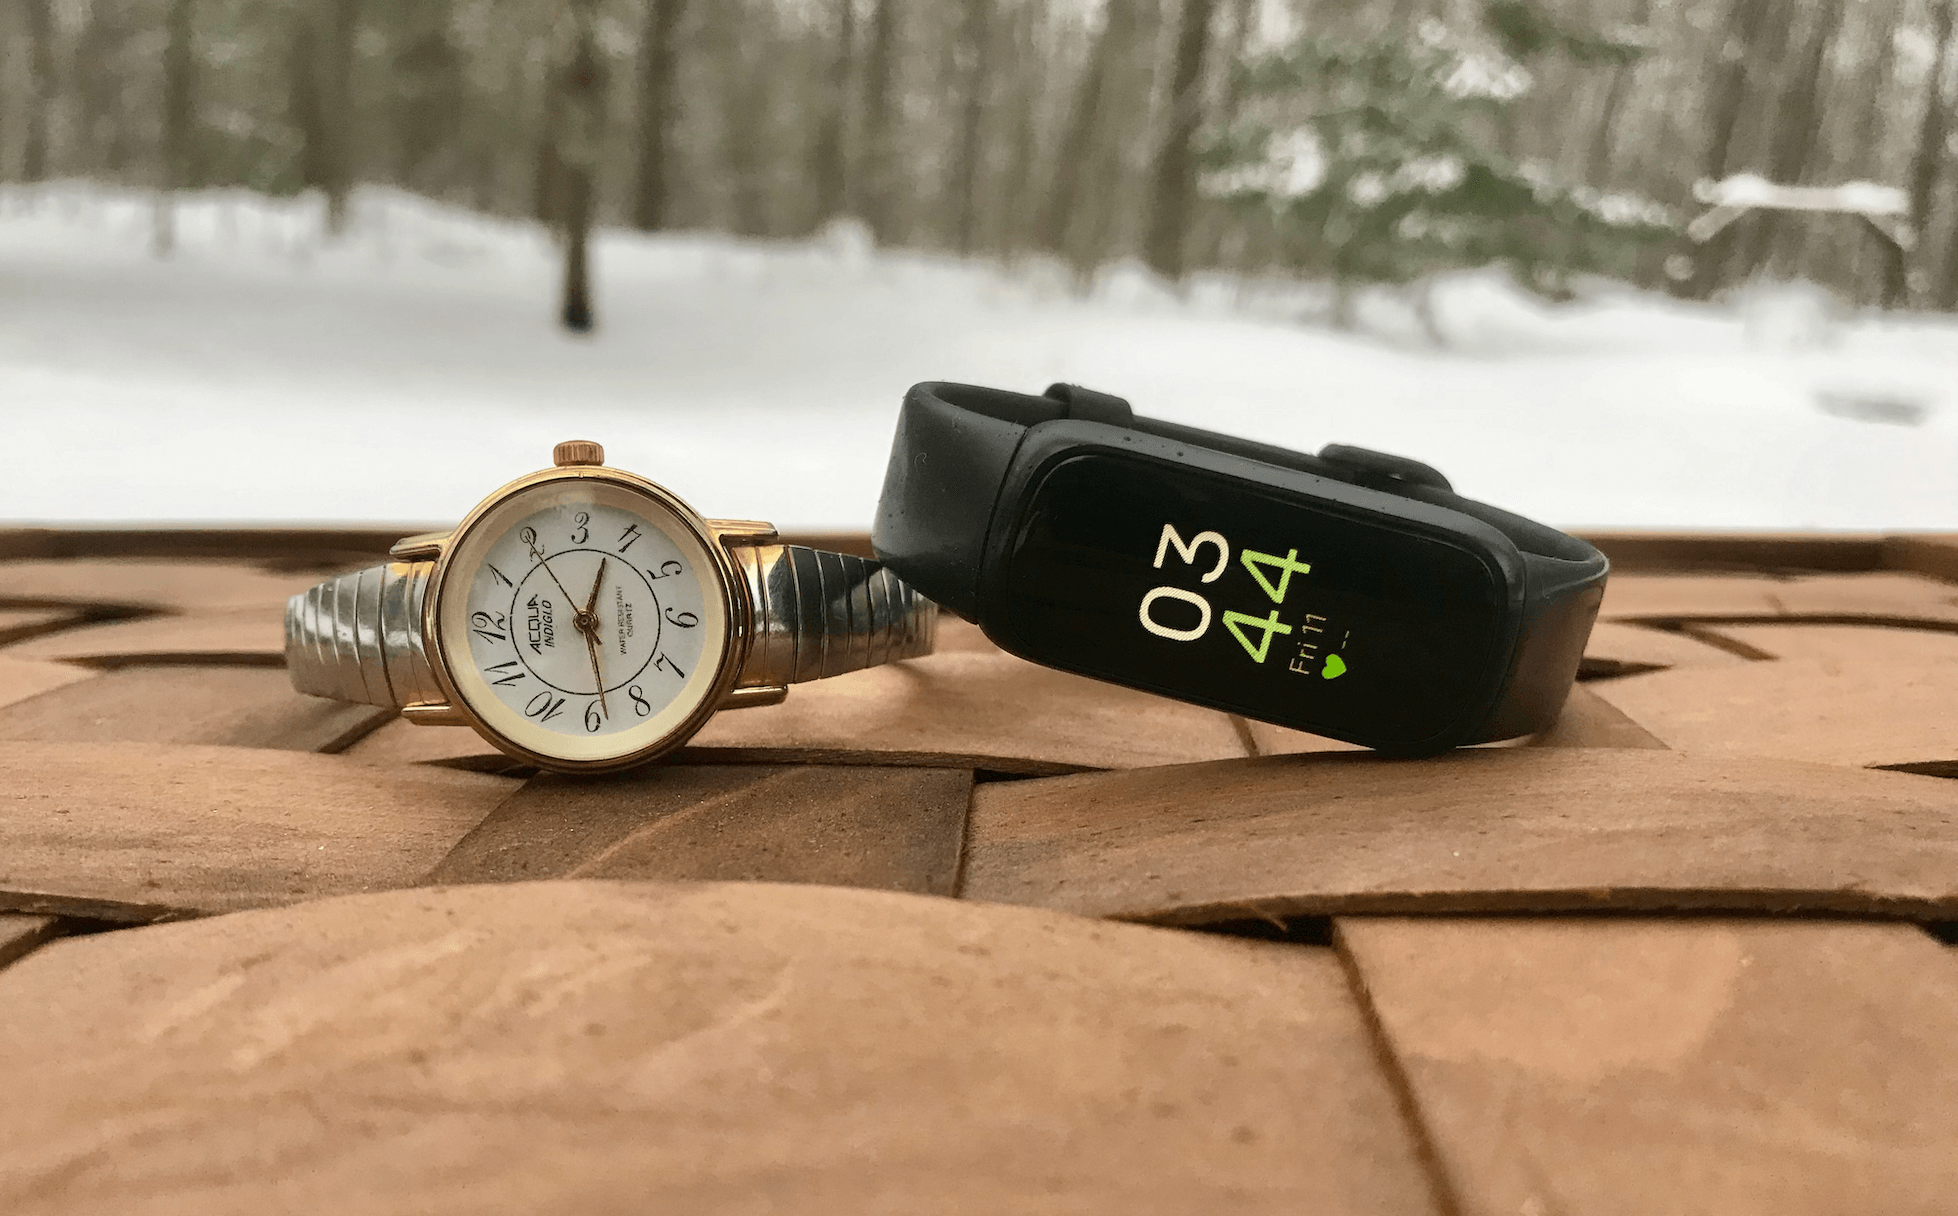 Fitbit or Analog – Managing Heart Rate and Staying Grounded